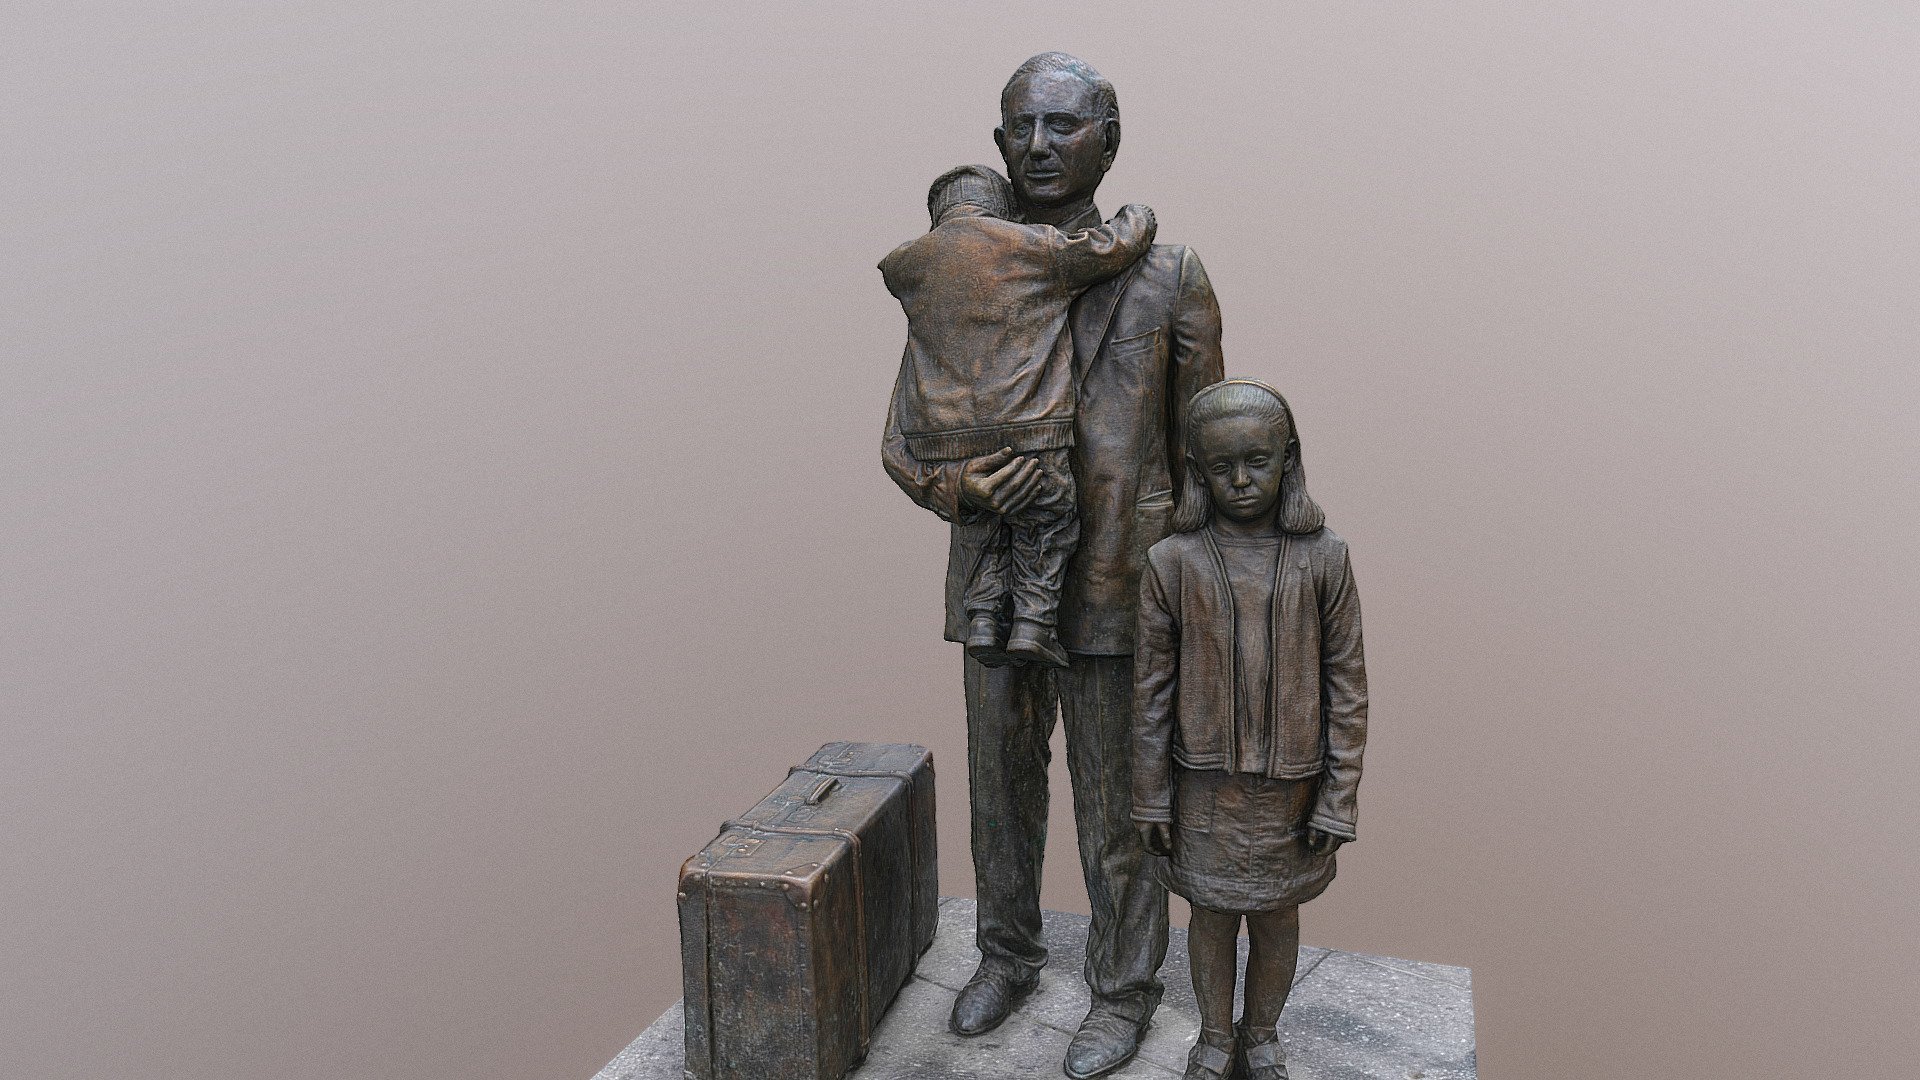 Sir Nicholas Winton bronze statue character figure,  public space art

Artist: Flor Kent, 2009 @ Prague main station, Czechia
 • https://goo.gl/maps/ajunLc8GLFNZkzc9A Jan 23 2021

Memorial of *The Winton Train, a private passenger train that travelled from the Czech Republic to Great Britain in September 2009 in tribute to the wartime efforts of Sir Nicholas Winton, described as the &lsquo;British Schindler' for his part in saving refugee children from Czechoslovakia. *
https://en.wikipedia.org/wiki/Winton_Train

Photogrammetry scan 180x24 MP - Sir Nicholas Winton statue - Buy Royalty Free 3D model by matousekfoto 3d model